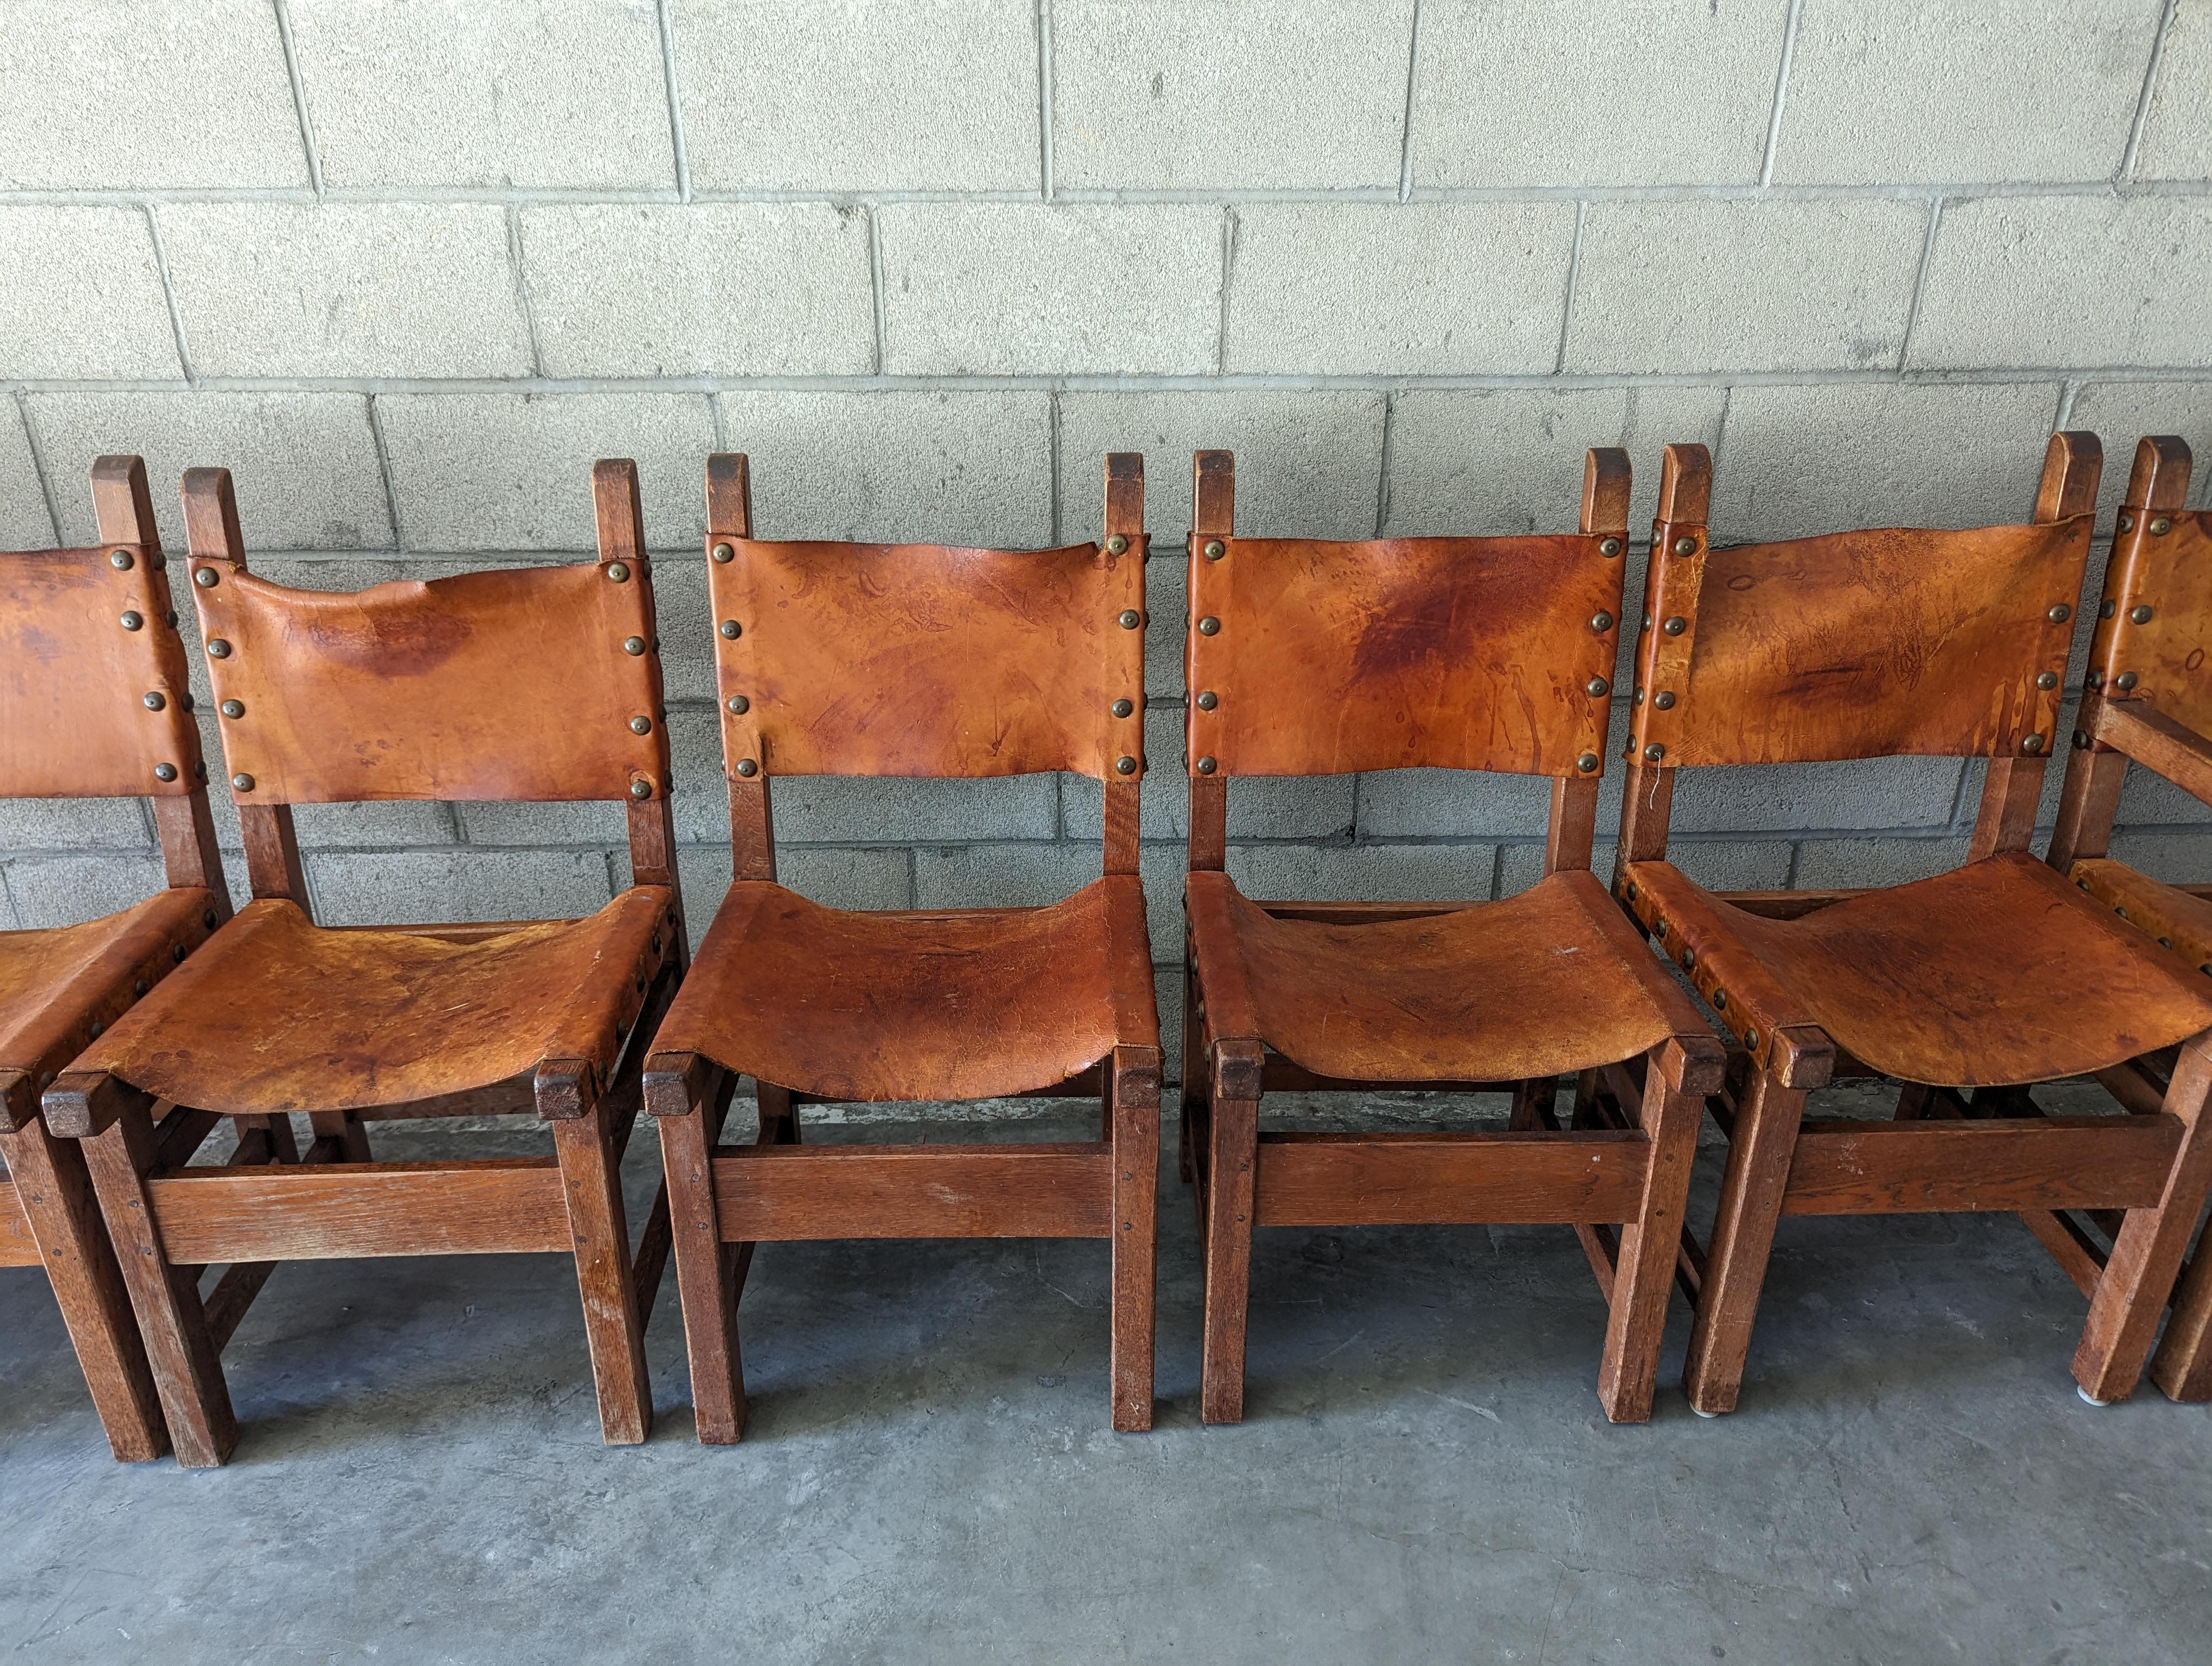 Metal Set of 8 Spanish Hand-Crafted Oak & Cognac Studded Leather Dining Chairs